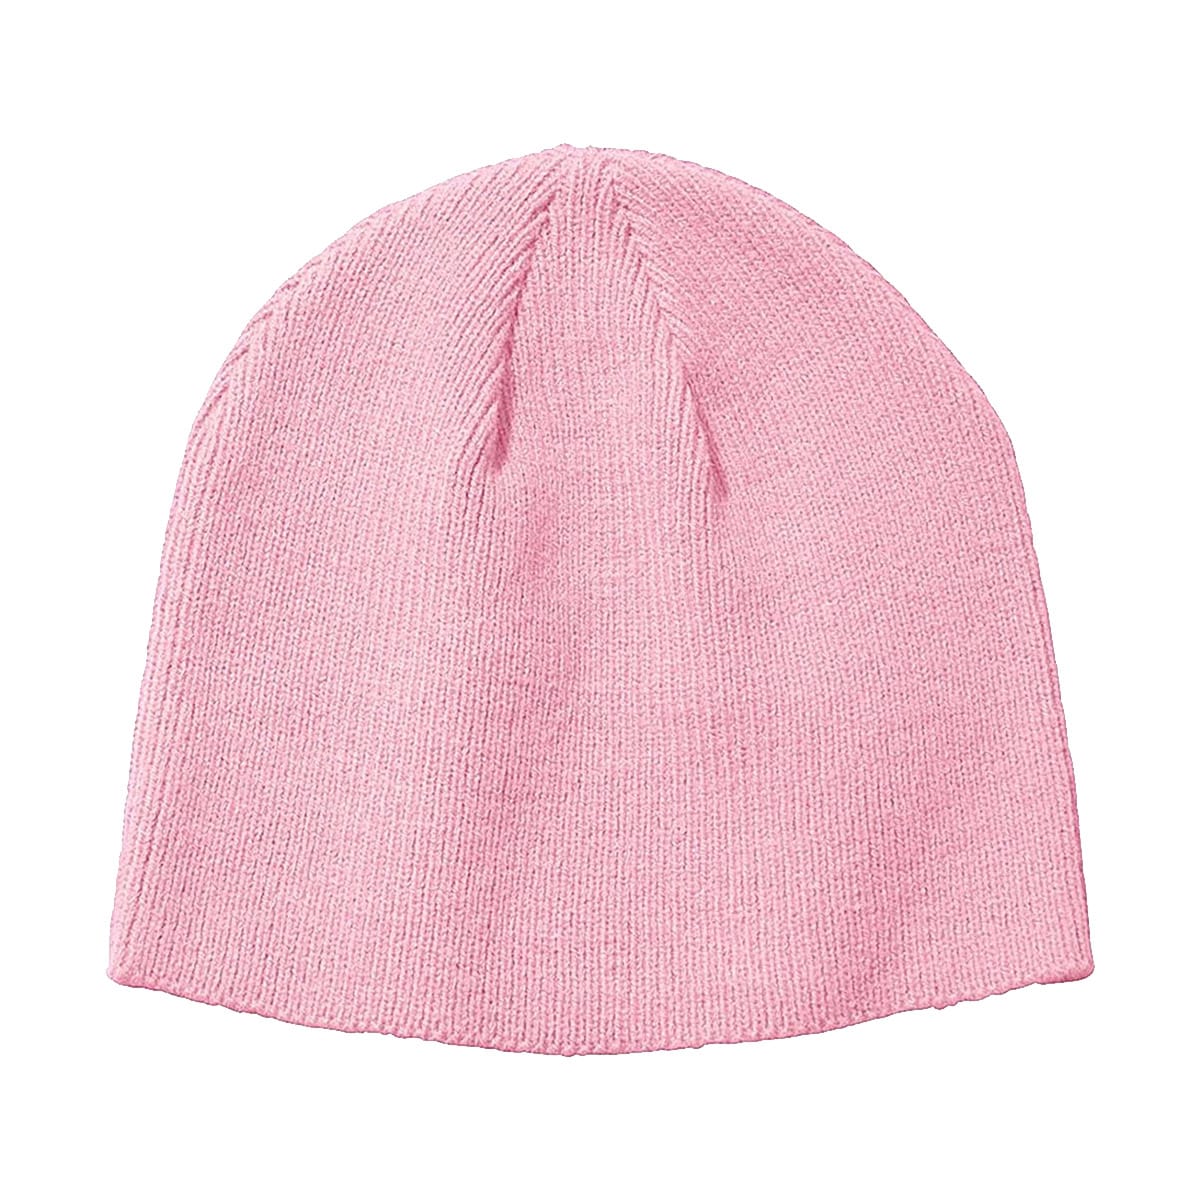 Light blue fitted hat with pink brim - juluflow